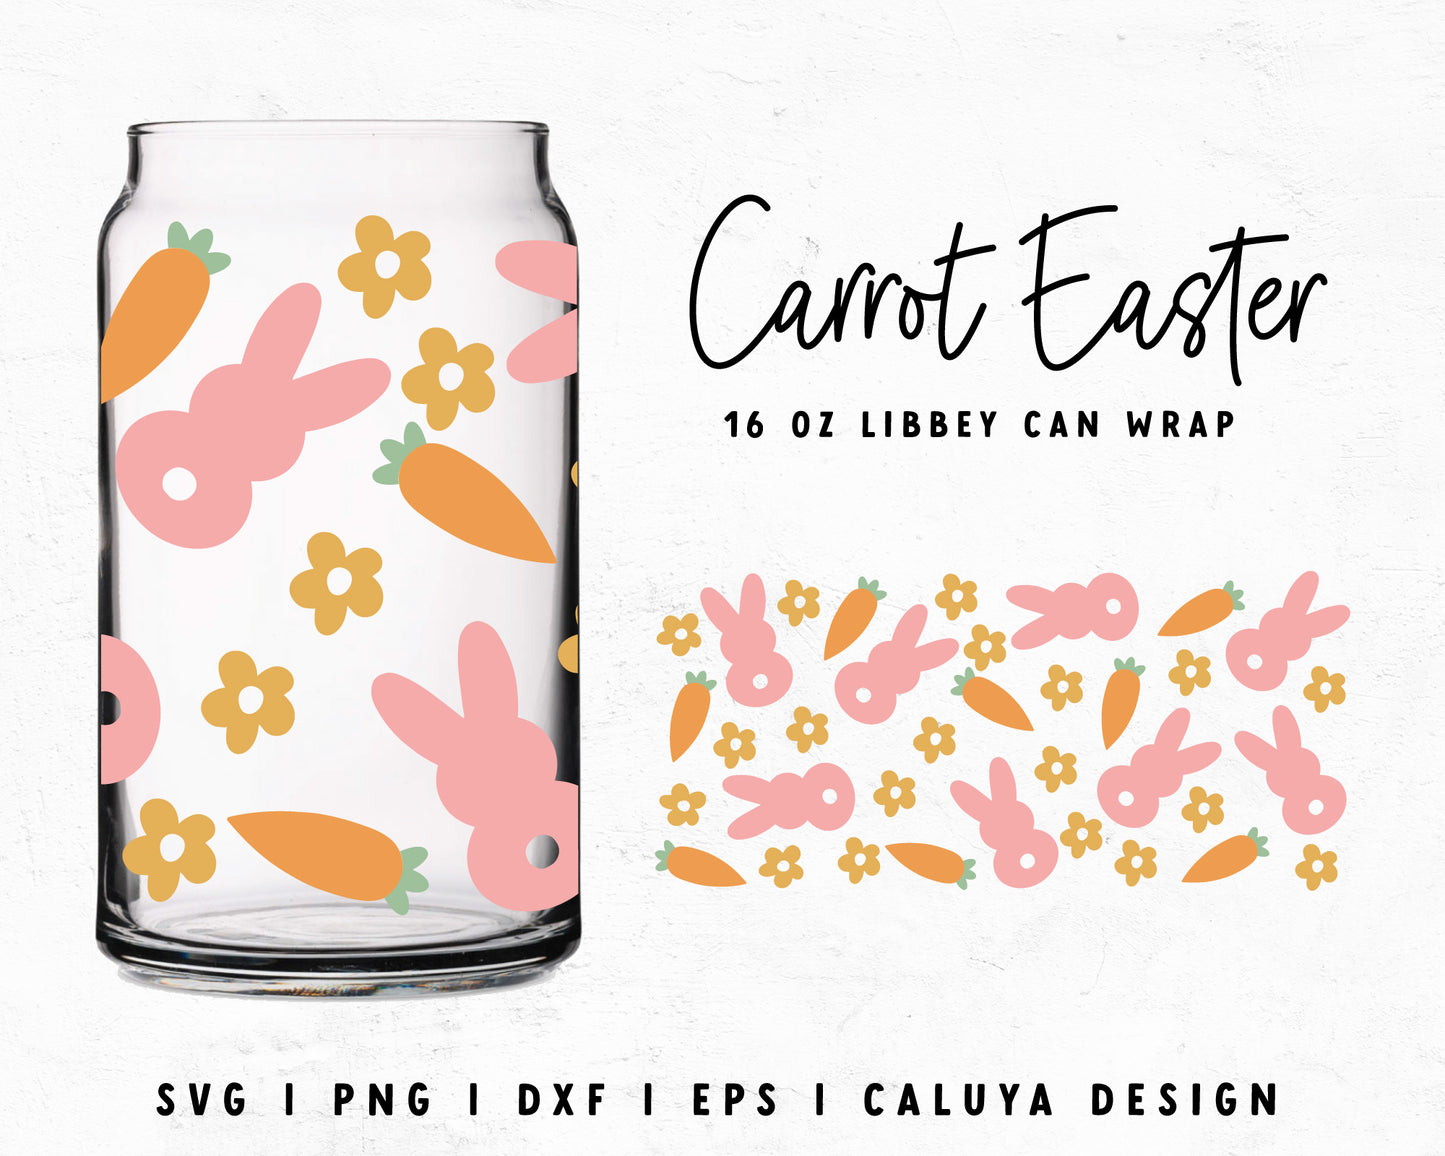 16oz Libbey Can Bunny Carrot Easter Cup Wrap Cut File for Cricut, Cameo Silhouette | Free SVG Cut File